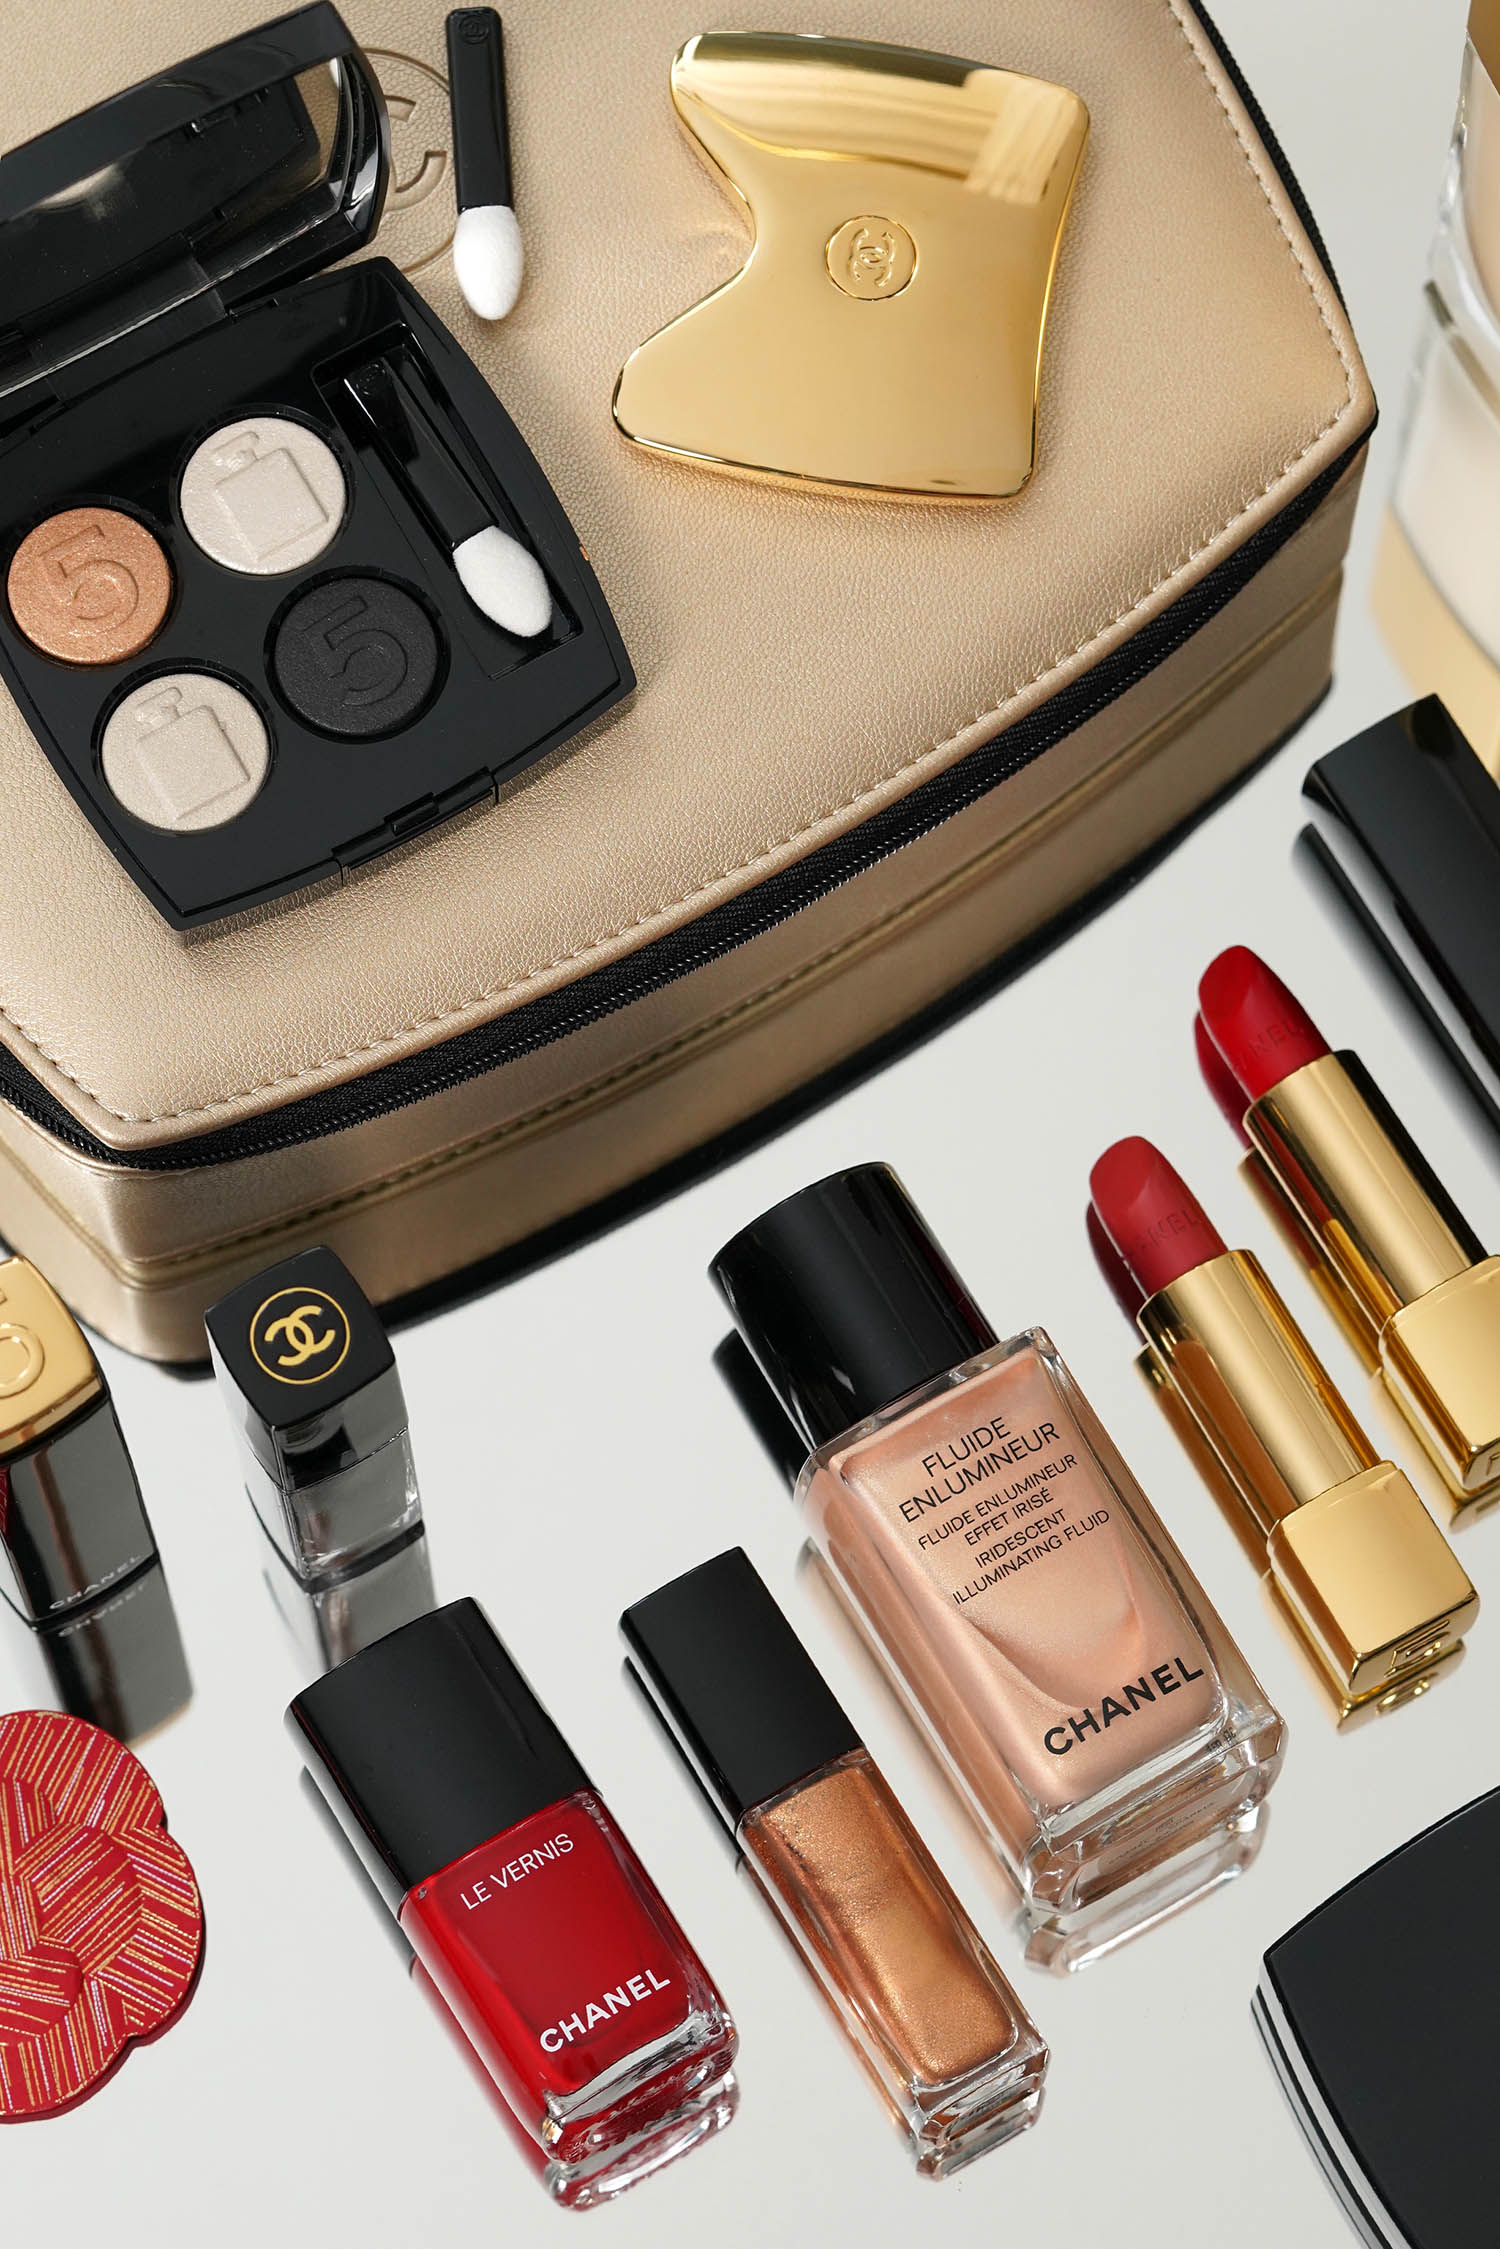 Chanel Holiday No 5 Makeup Collection - The Beauty Look Book